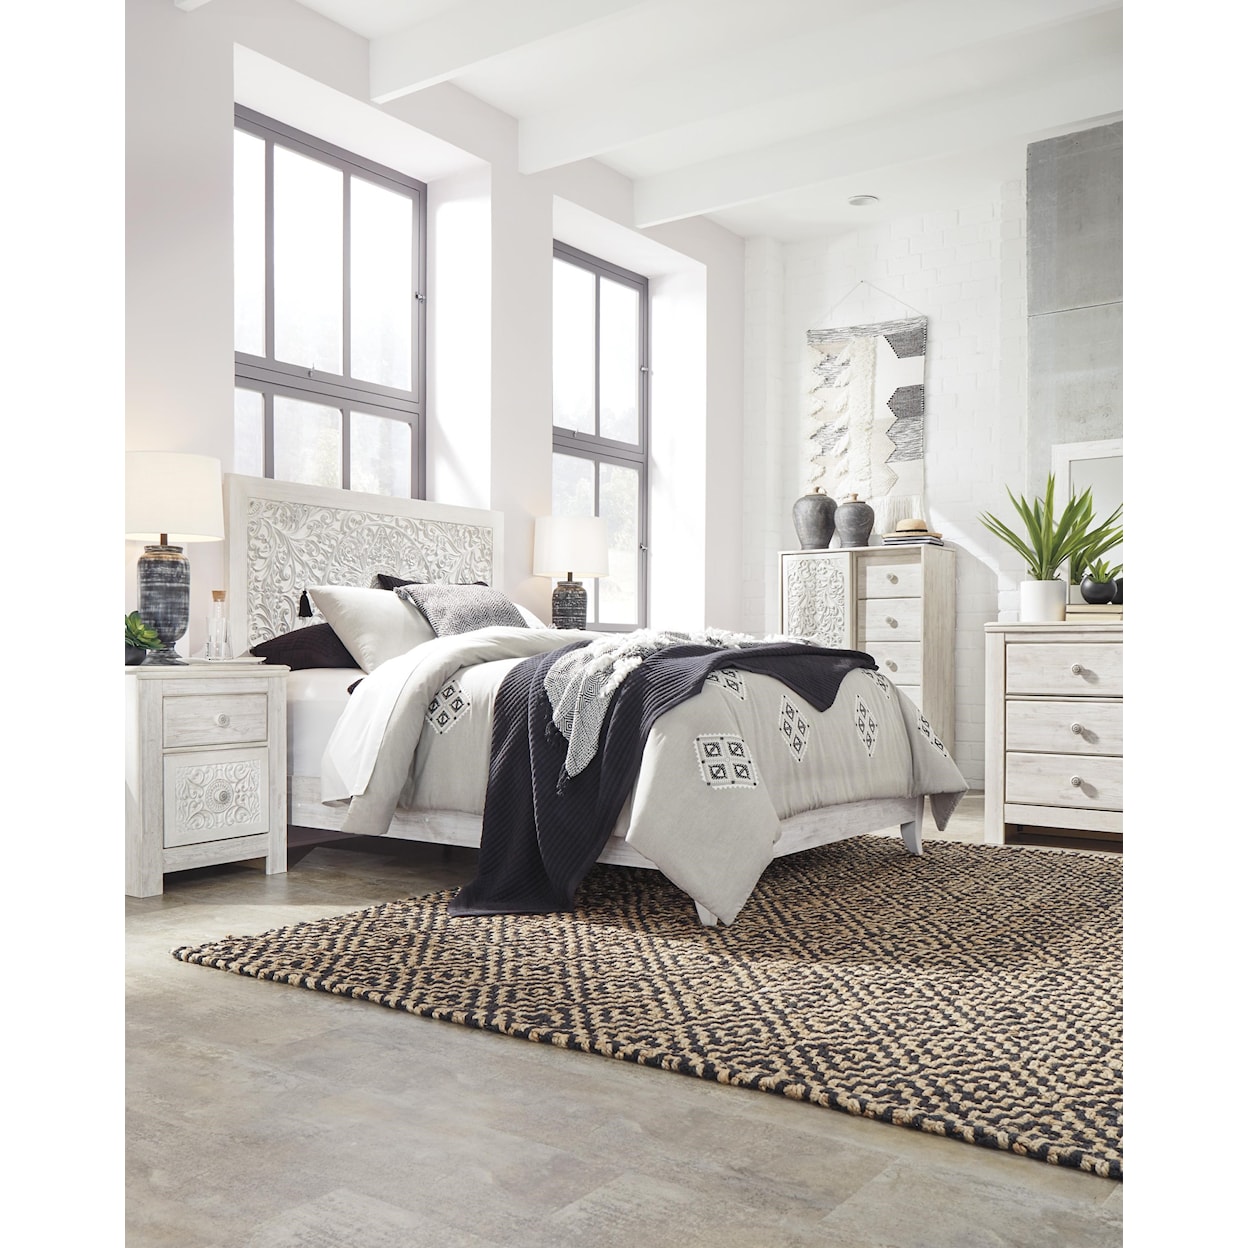 Signature Design by Ashley Paxberry 5 Piece King Bedroom Set